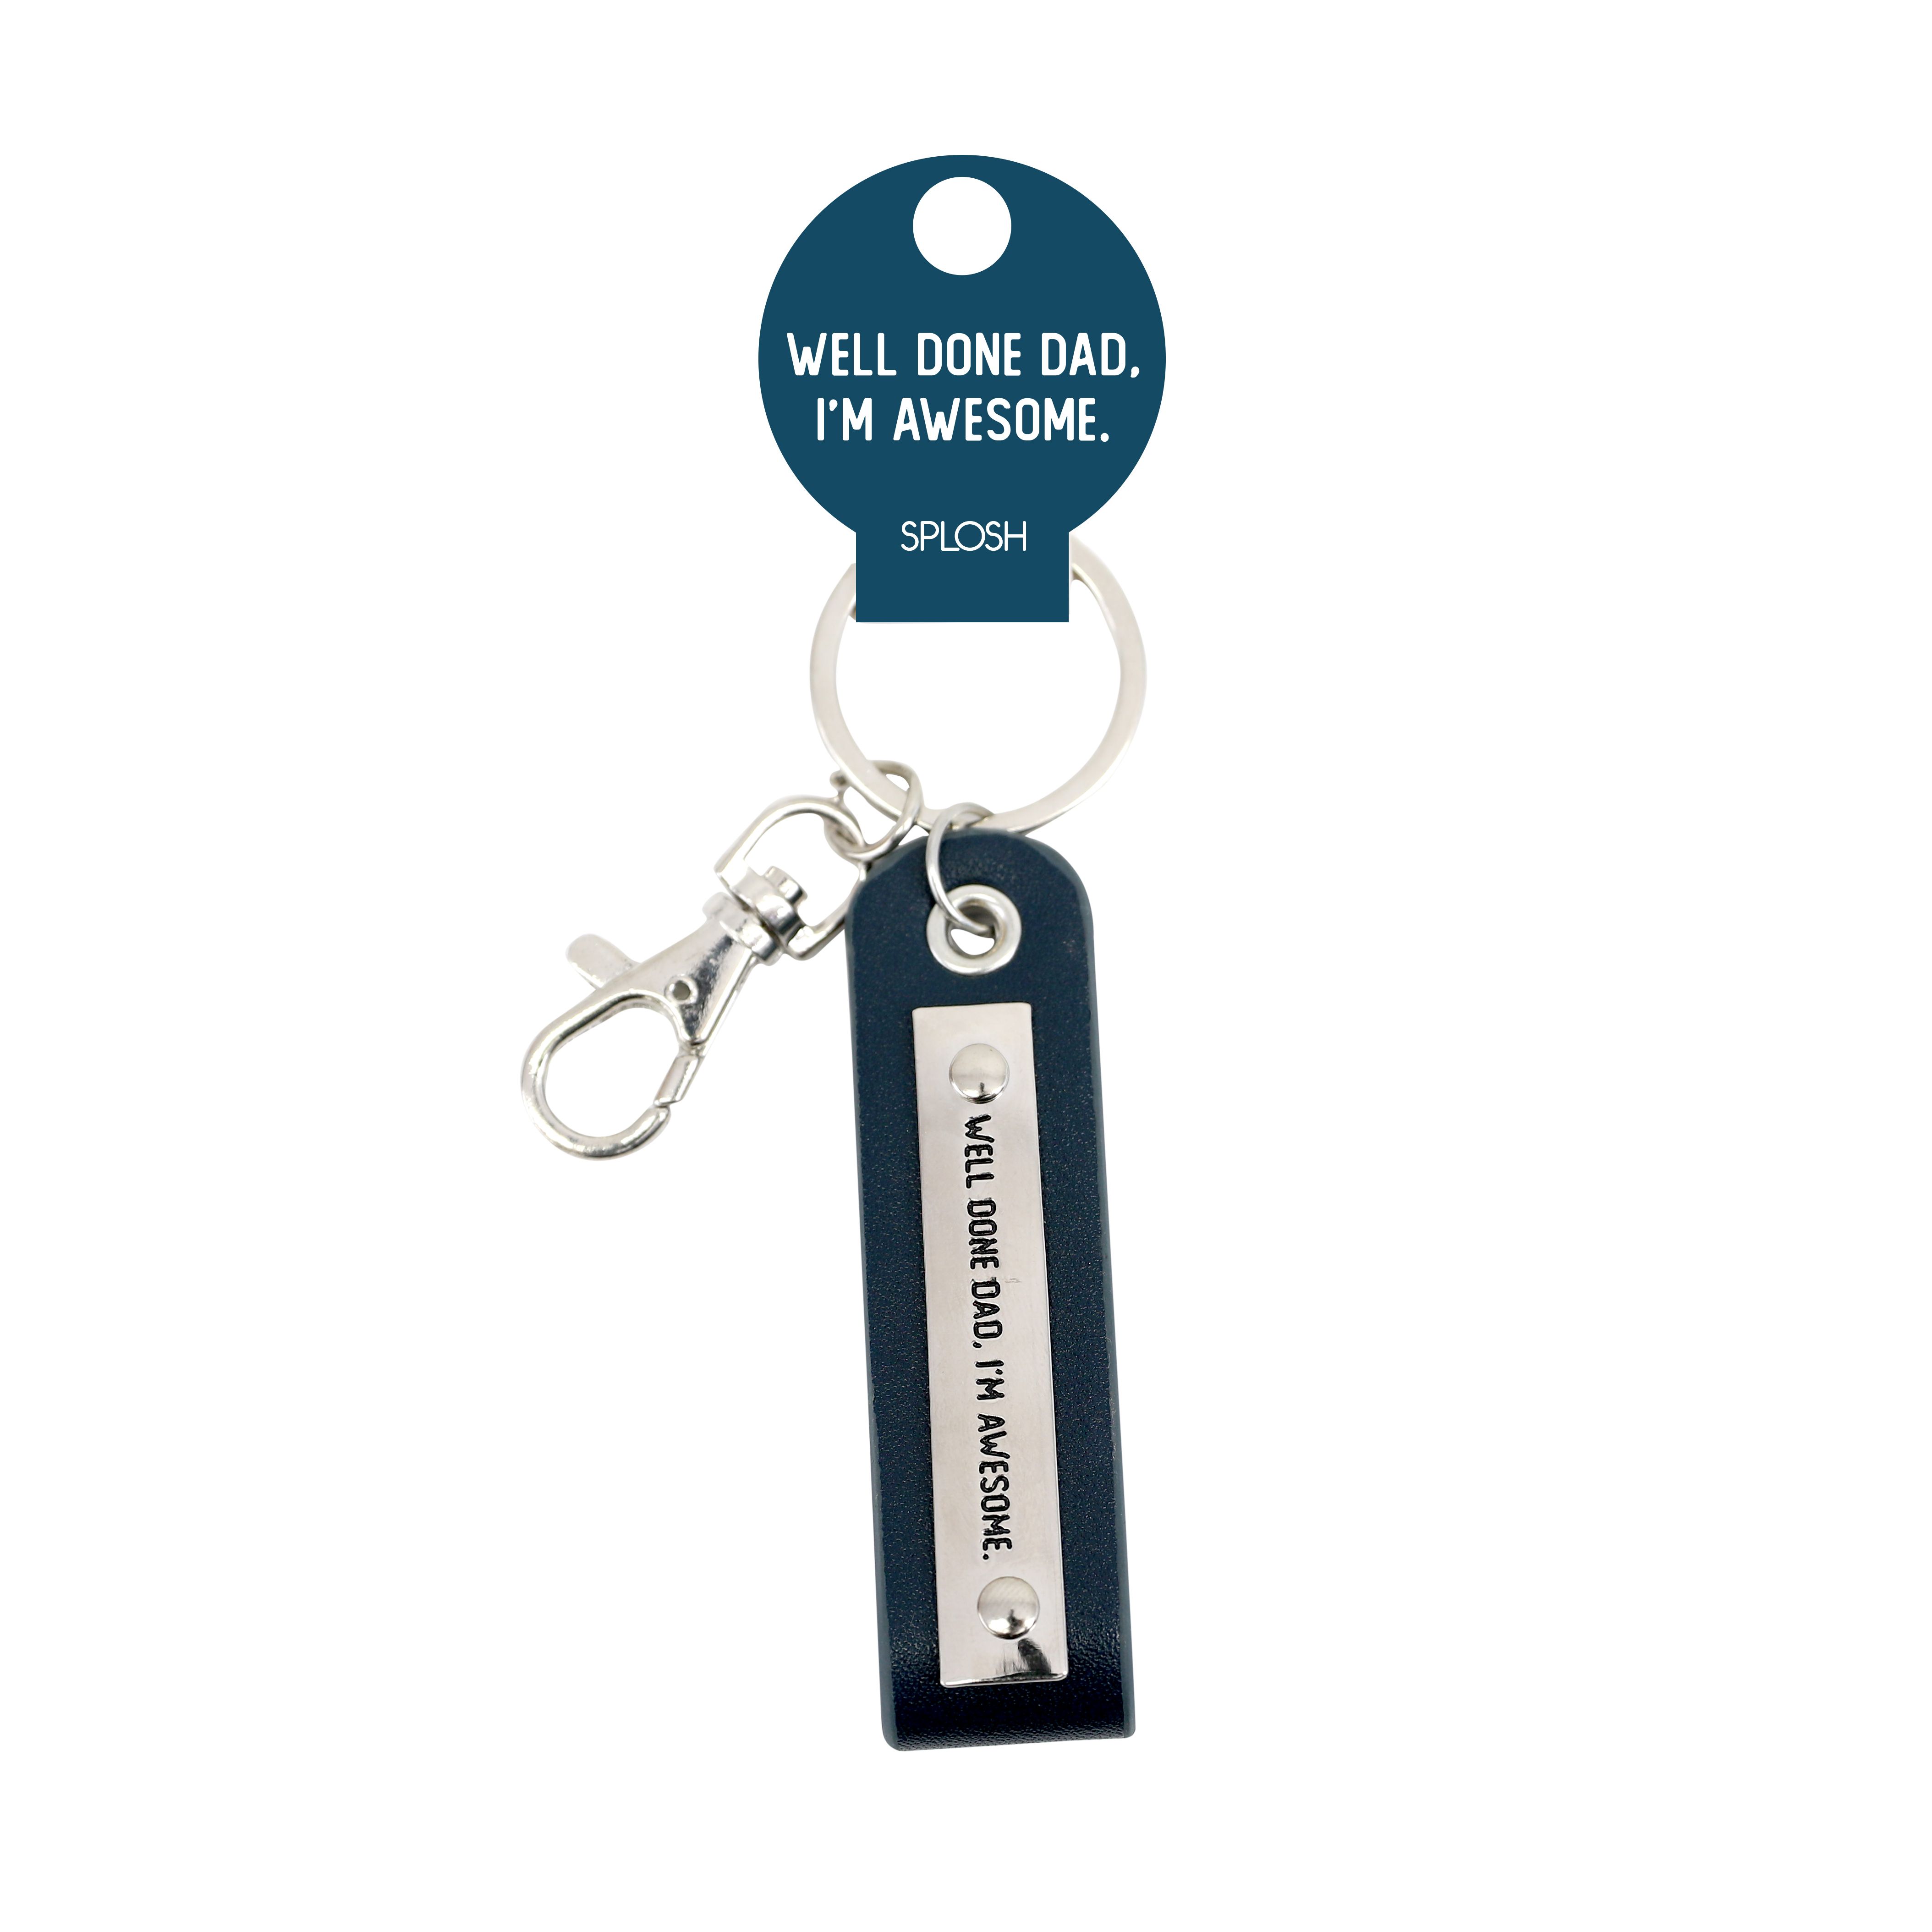 Father's Day Key Chain - Splosh Well Done Dad